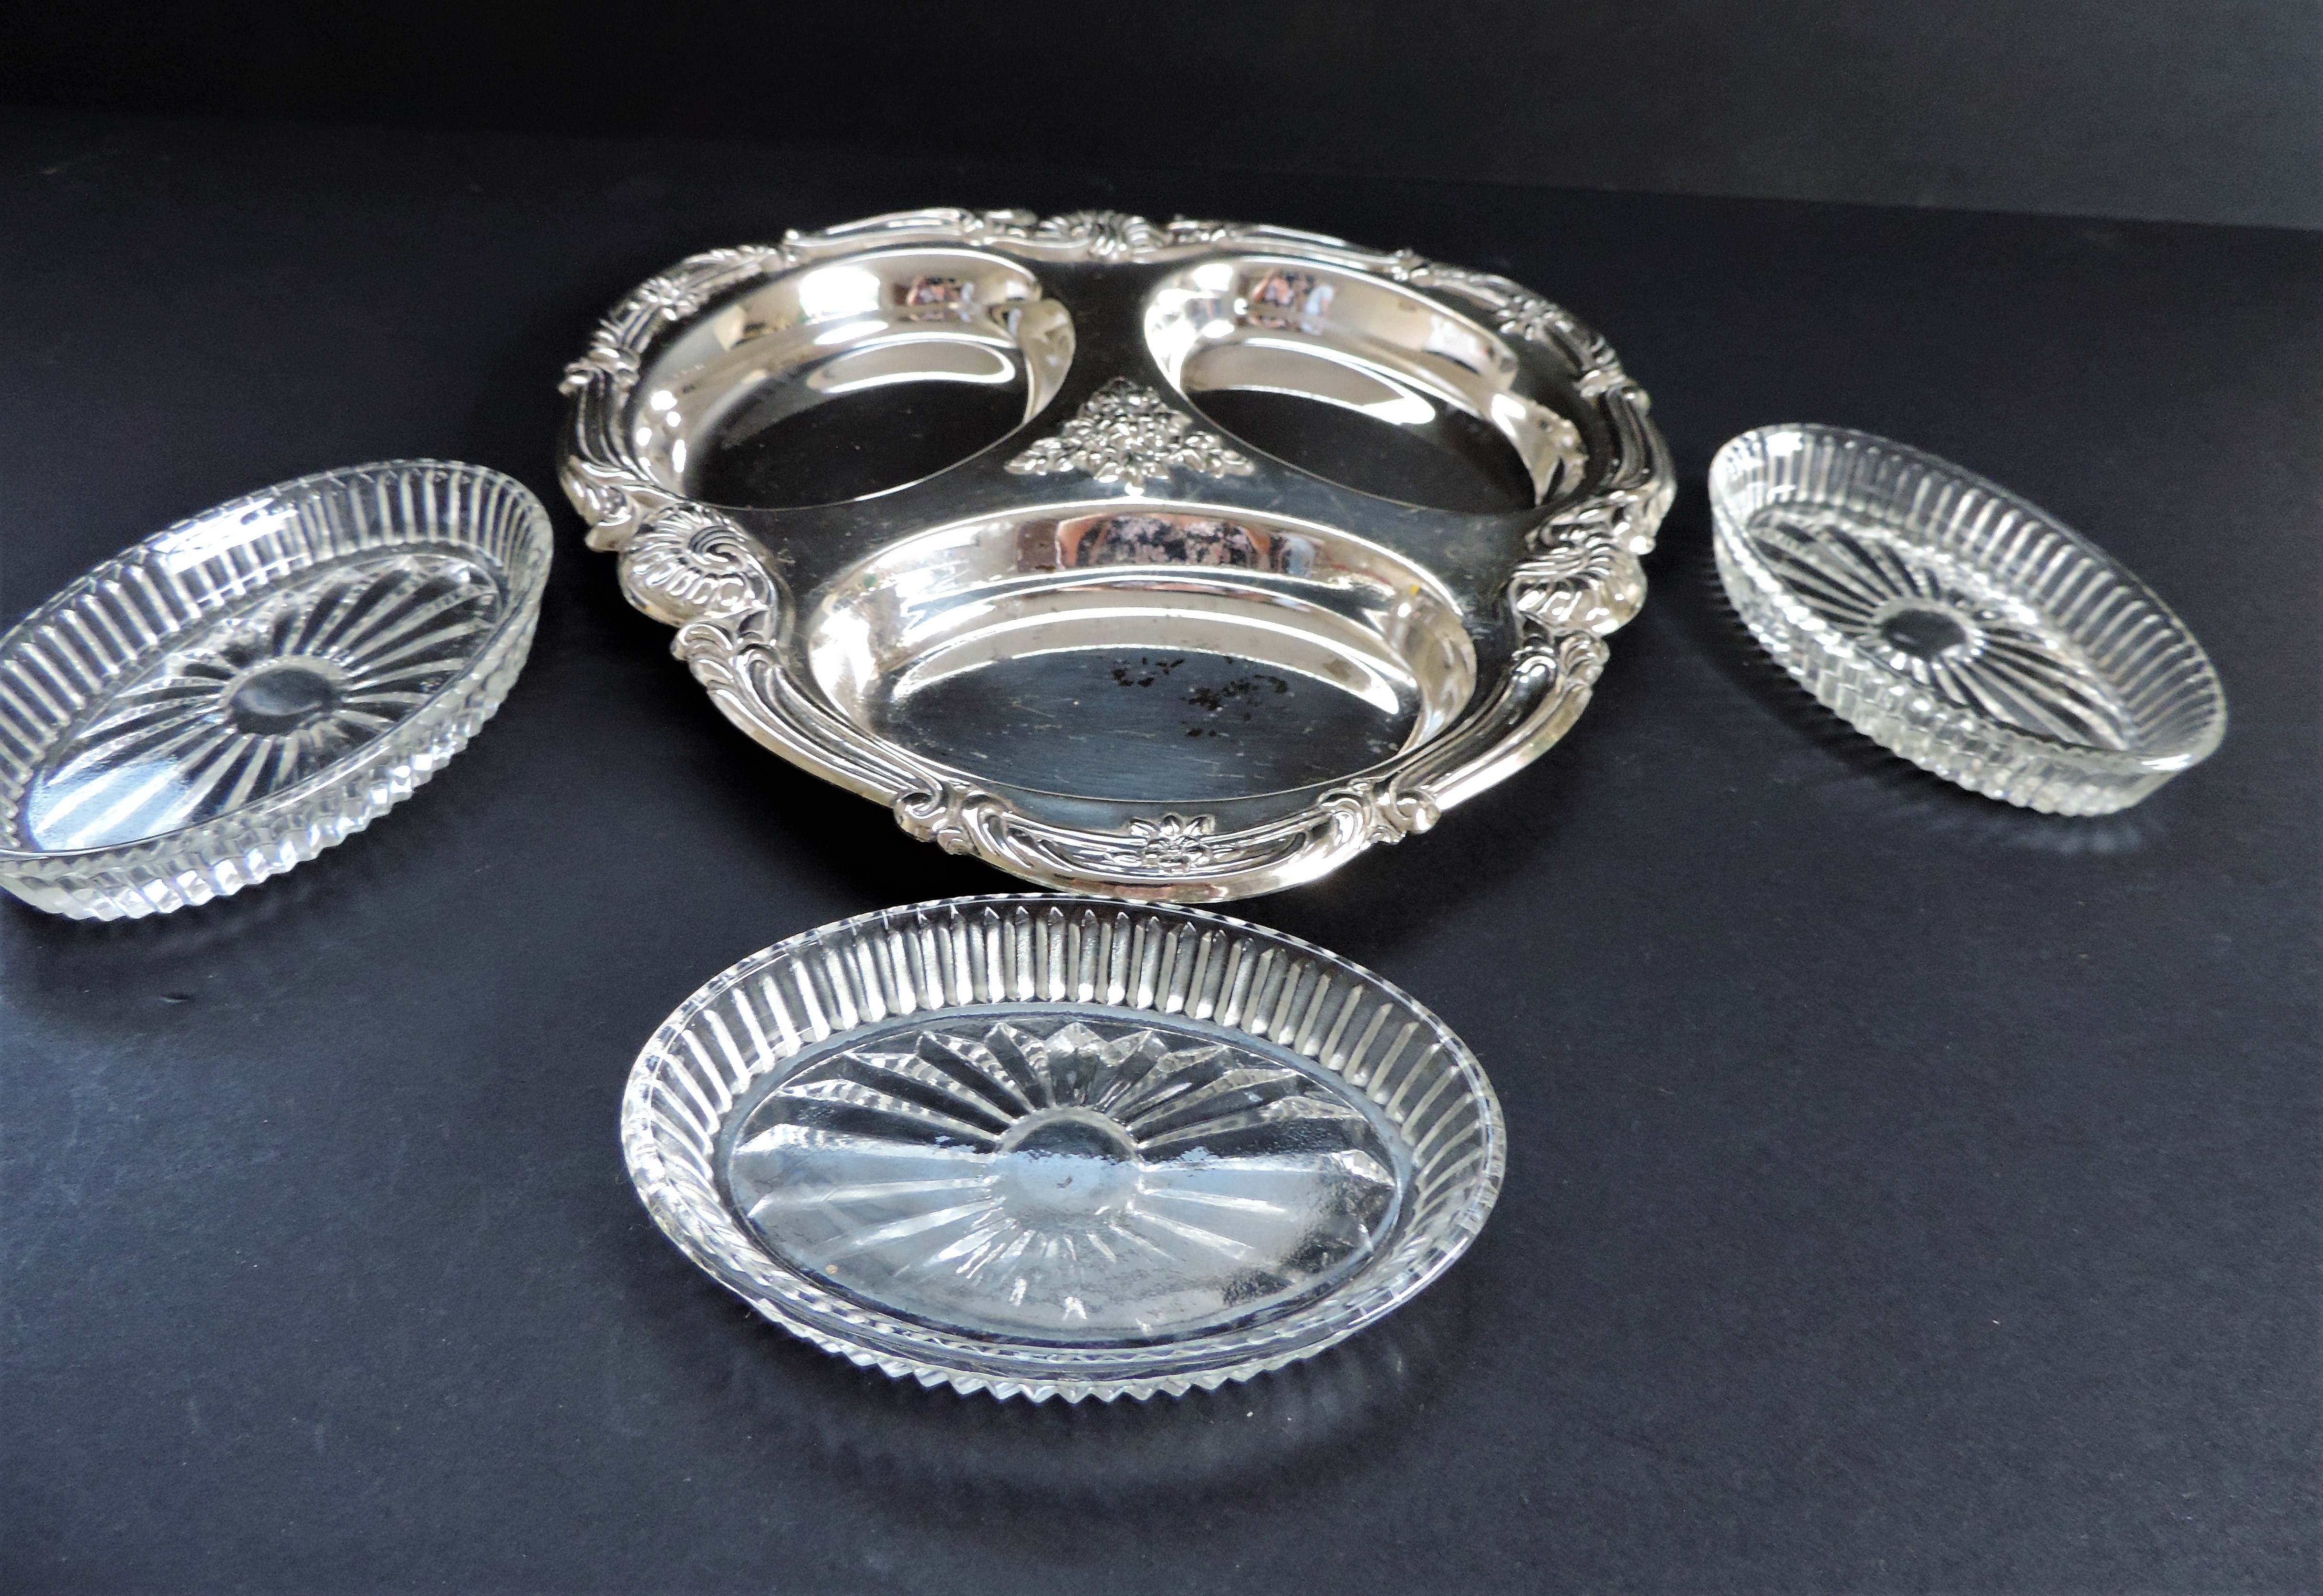 Vintage Silver Plate Hors d'oeuvres Serving Dish - Image 4 of 4